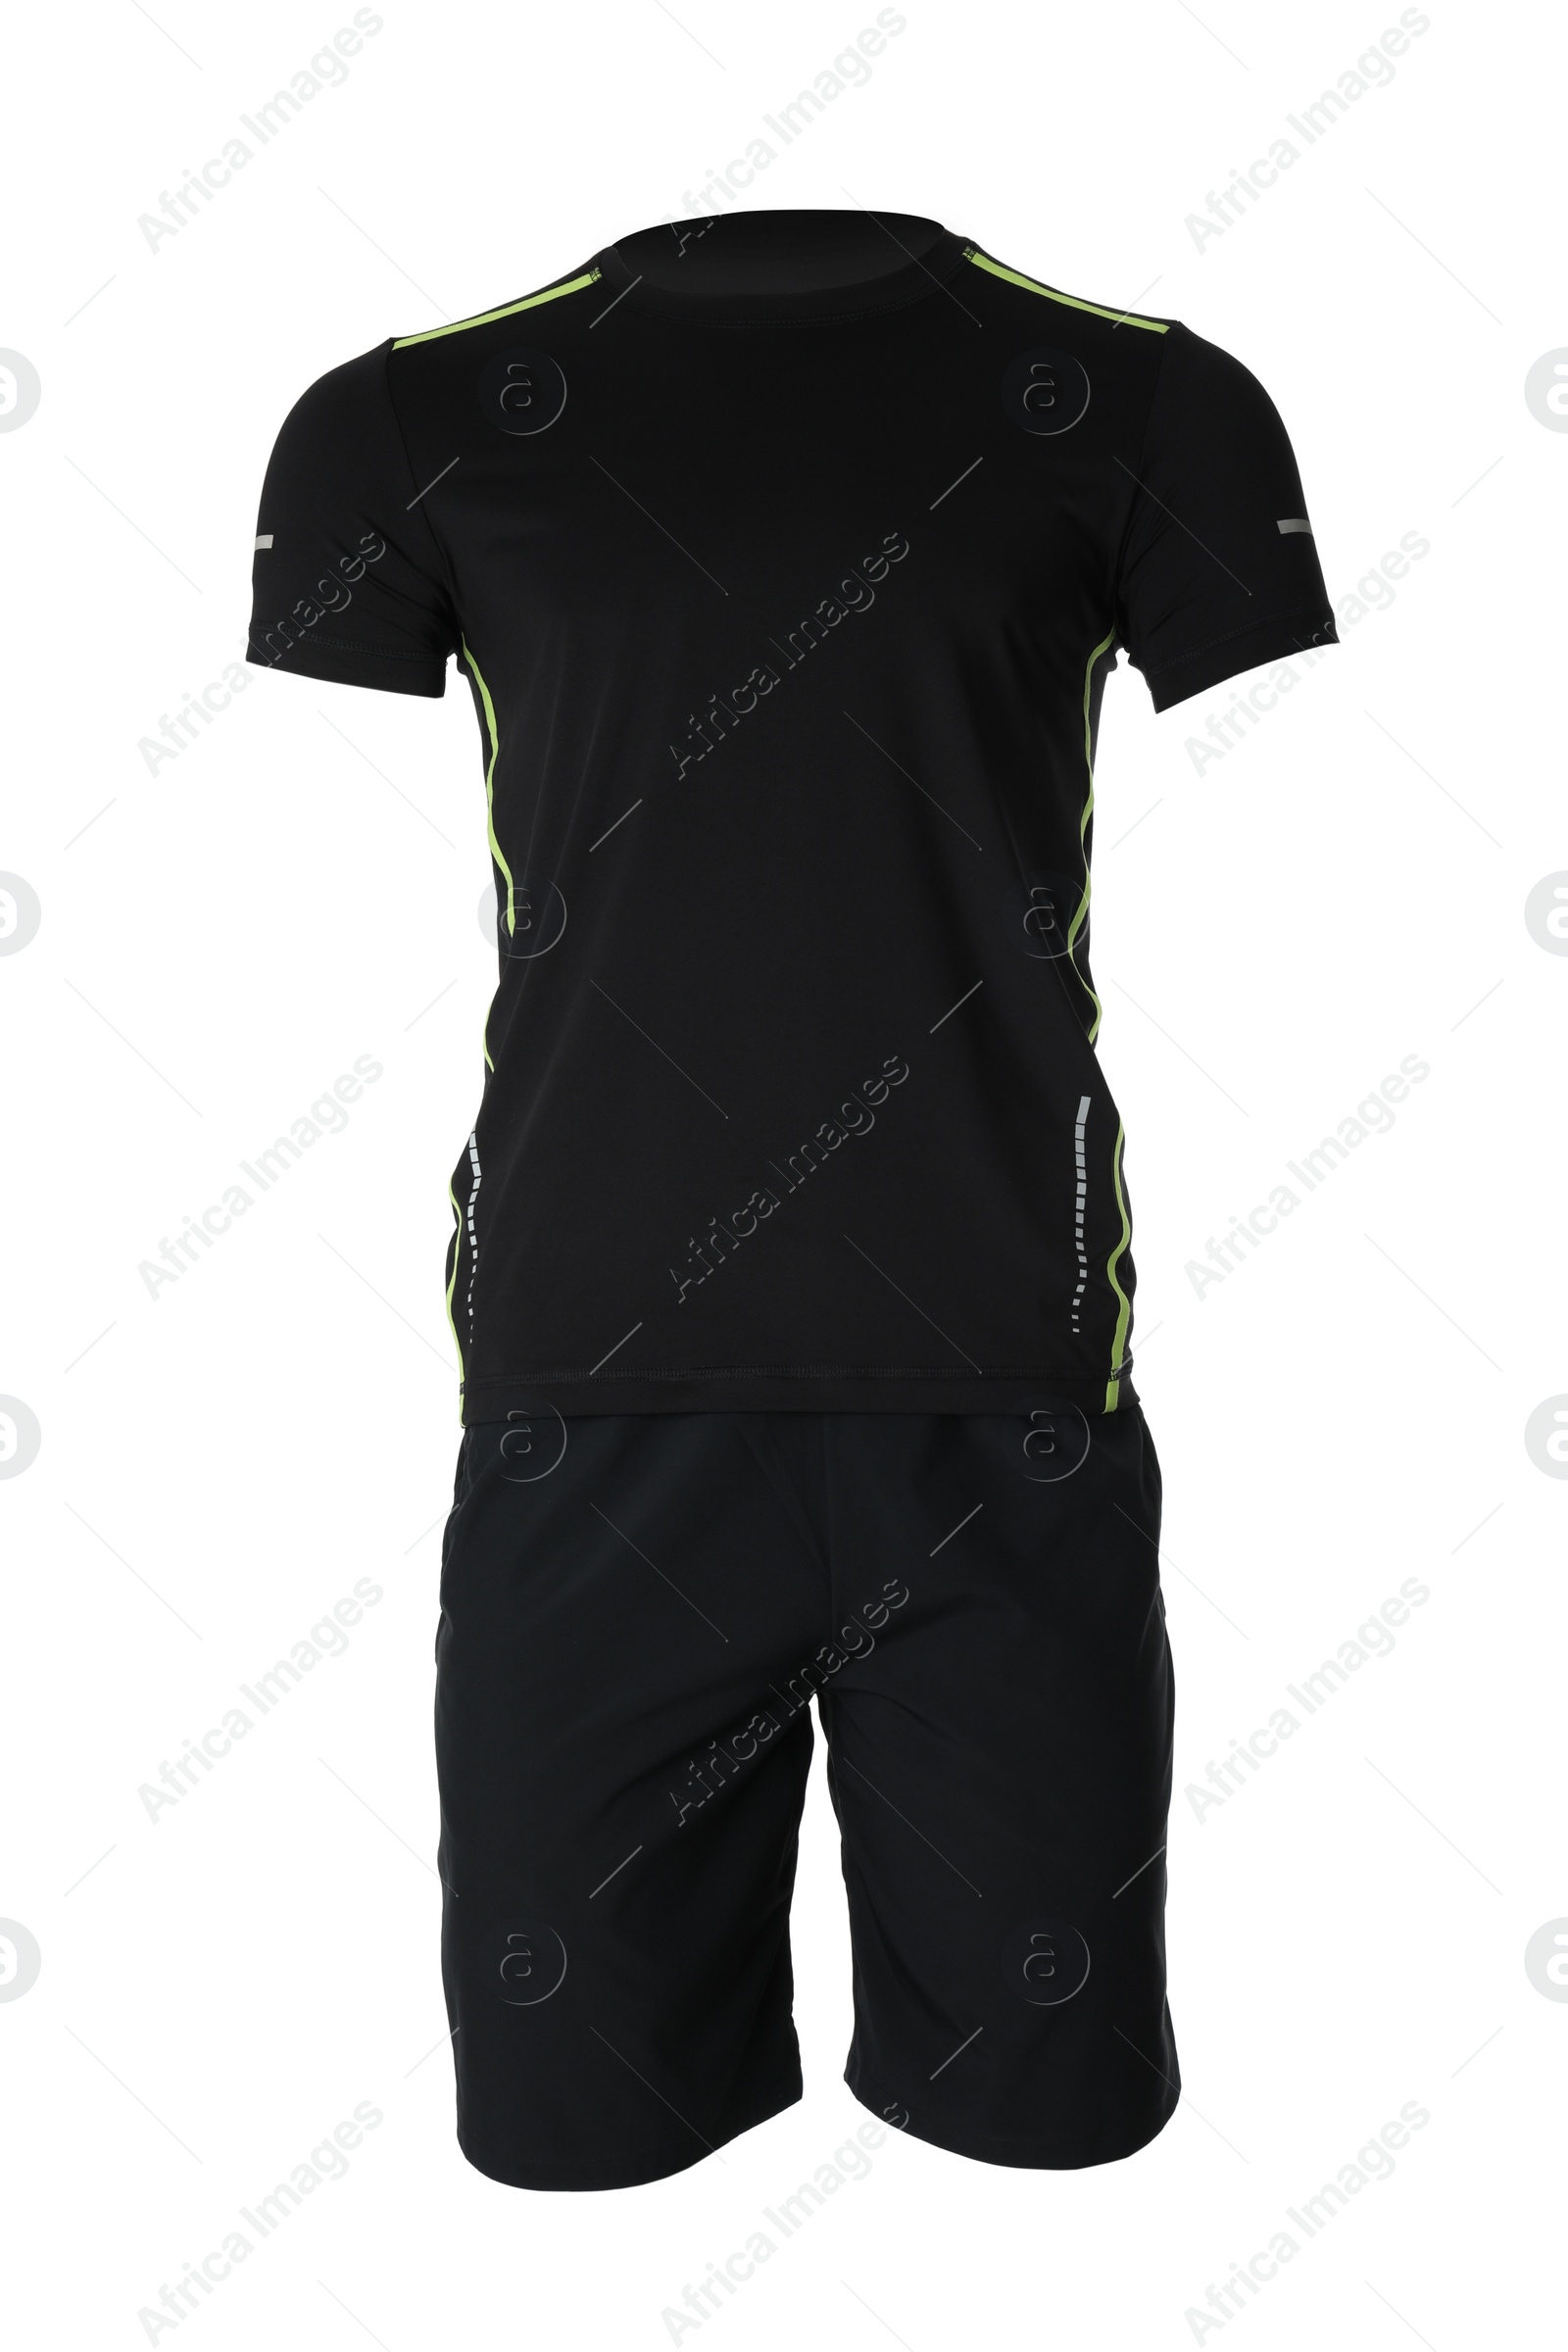 Photo of New men's sports clothing isolated on white